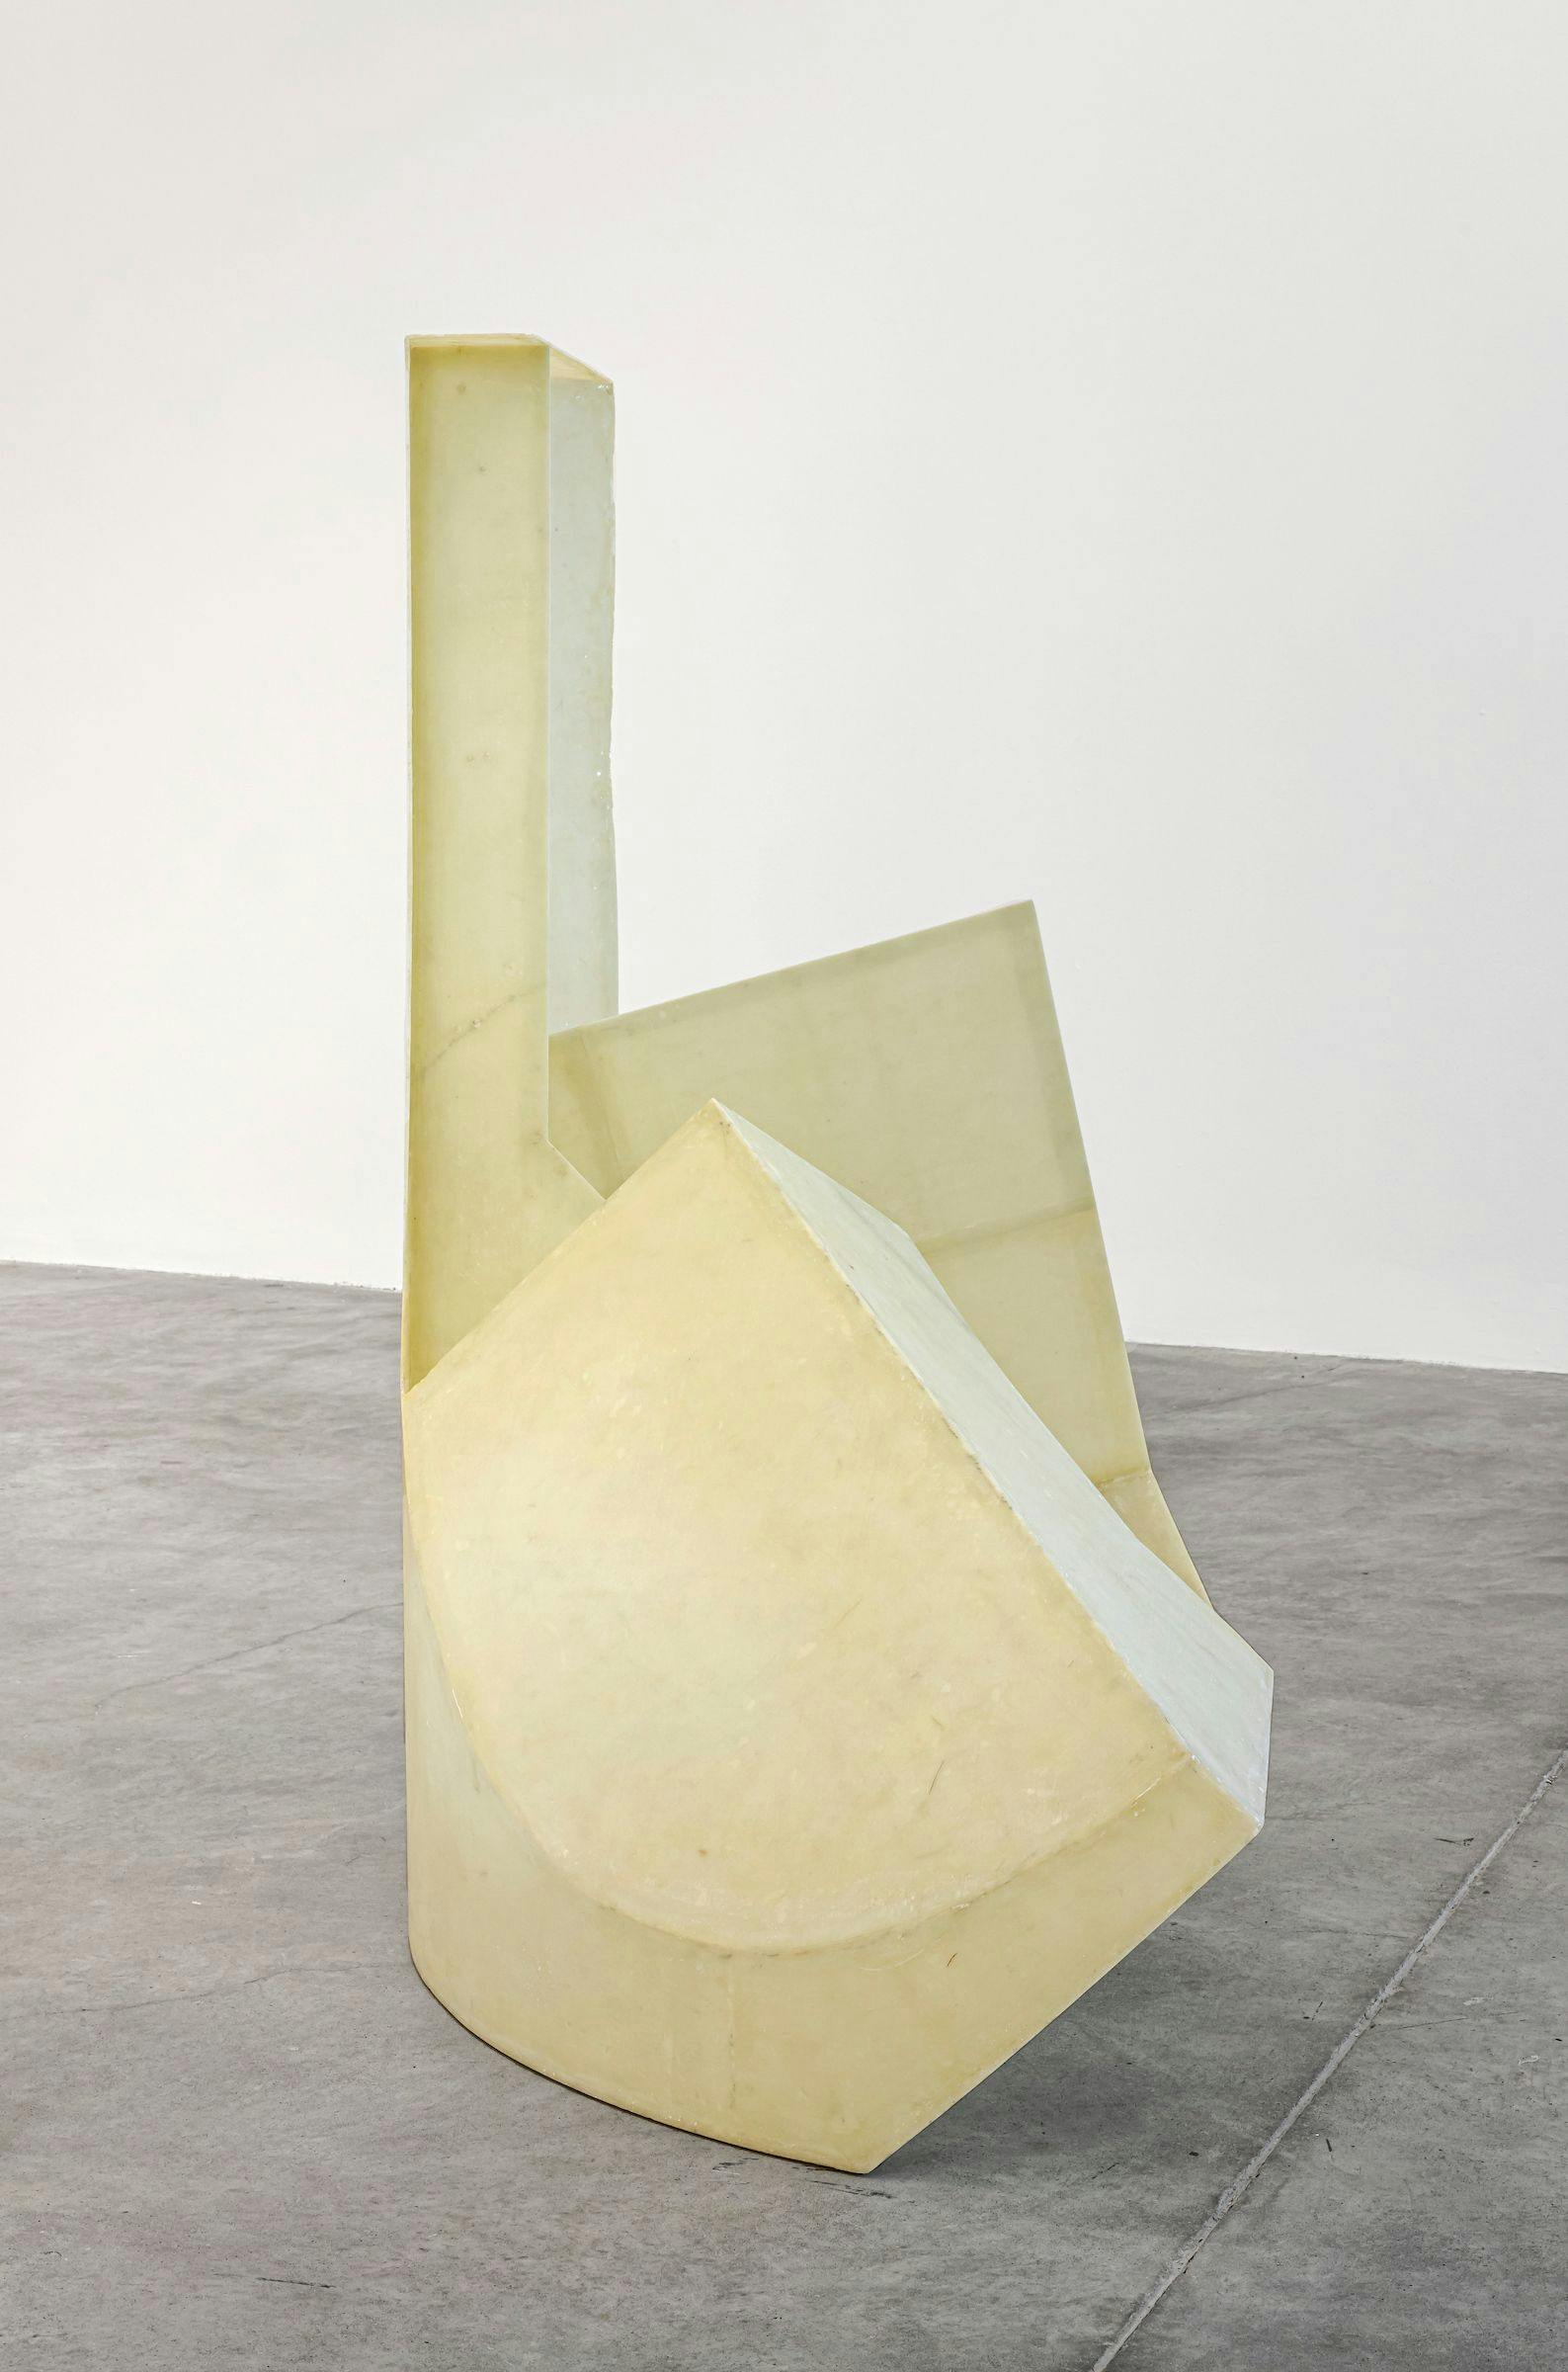 Jen Aikten, Altered Cylinder C (Standing), 2023. Epoxy resin and fibreglass cloth. Commissioned by The Power Plant, 2023. Courtesy the artist, Nicholas Meltivier Gallery, Toronto, and TrépanierBaer, Calgary. Photo: Toni Hafkenscheid.